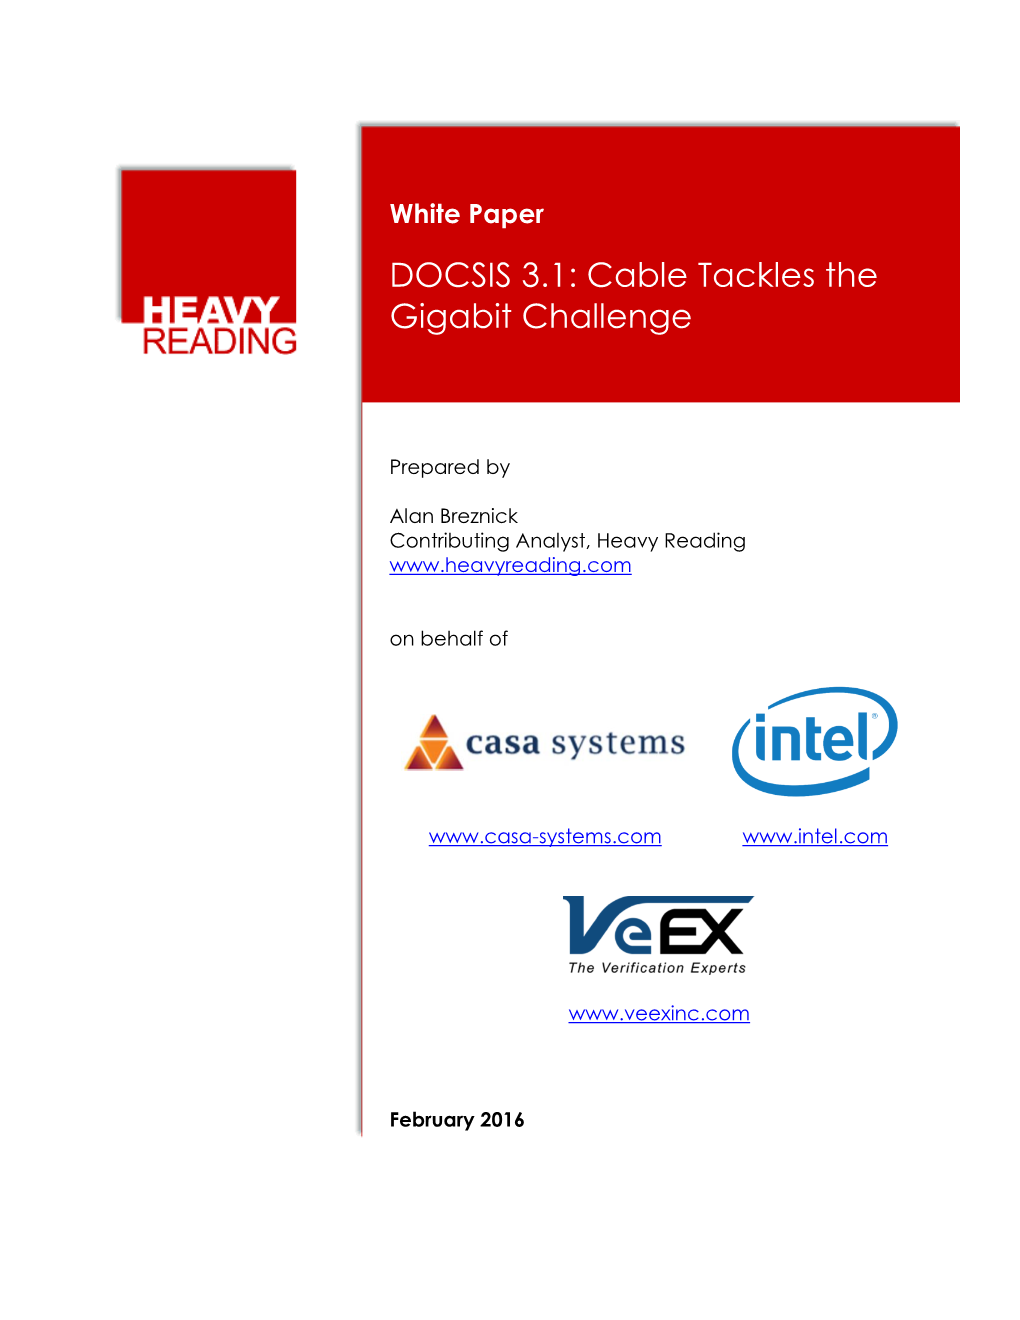 White Paper: DOCSIS 3.1: Cable Tackles the Gigabit Challenge